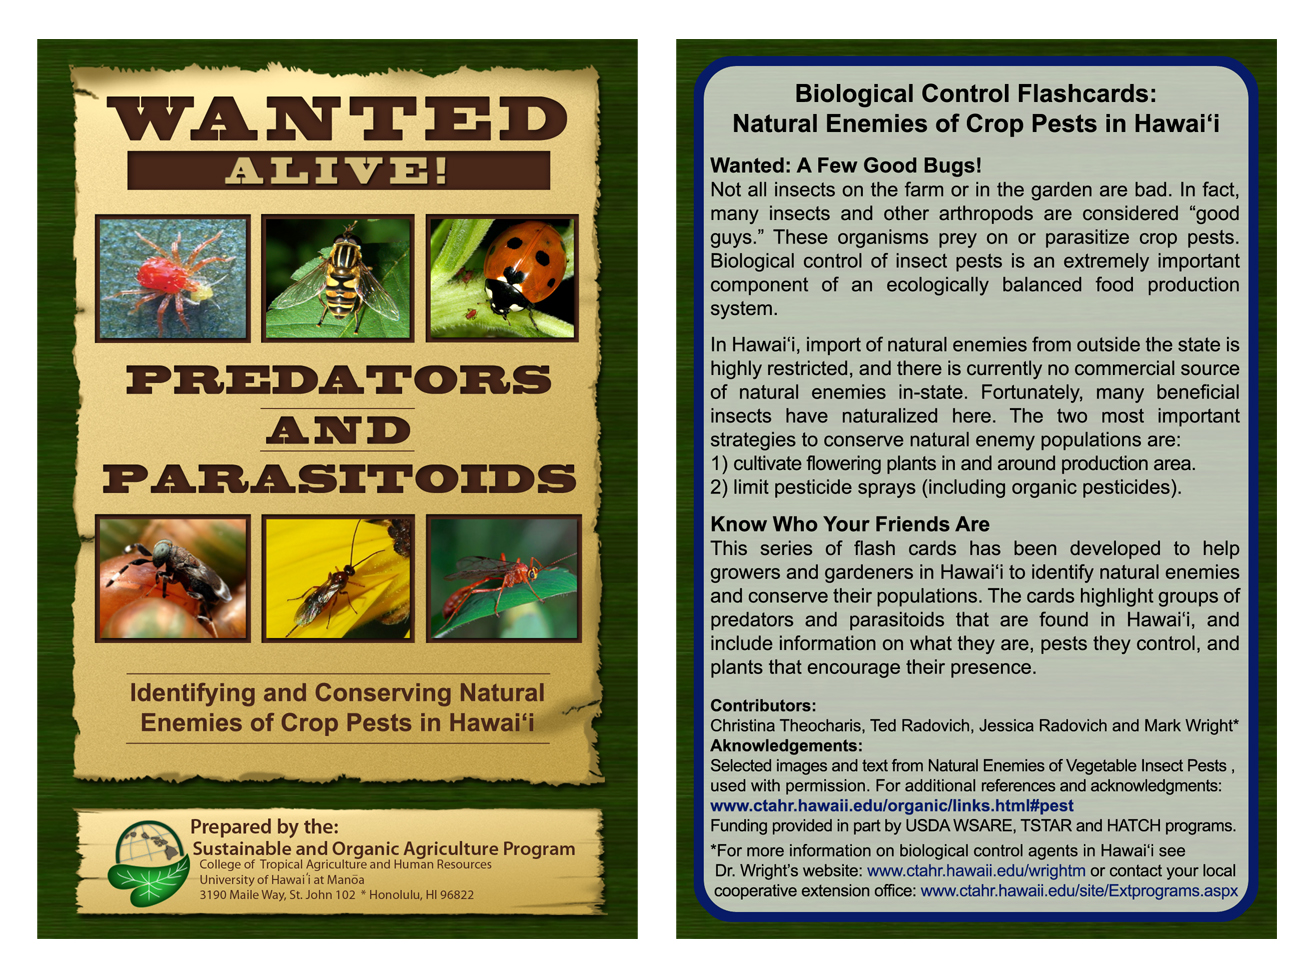 Where can you find a yard pest identification chart?